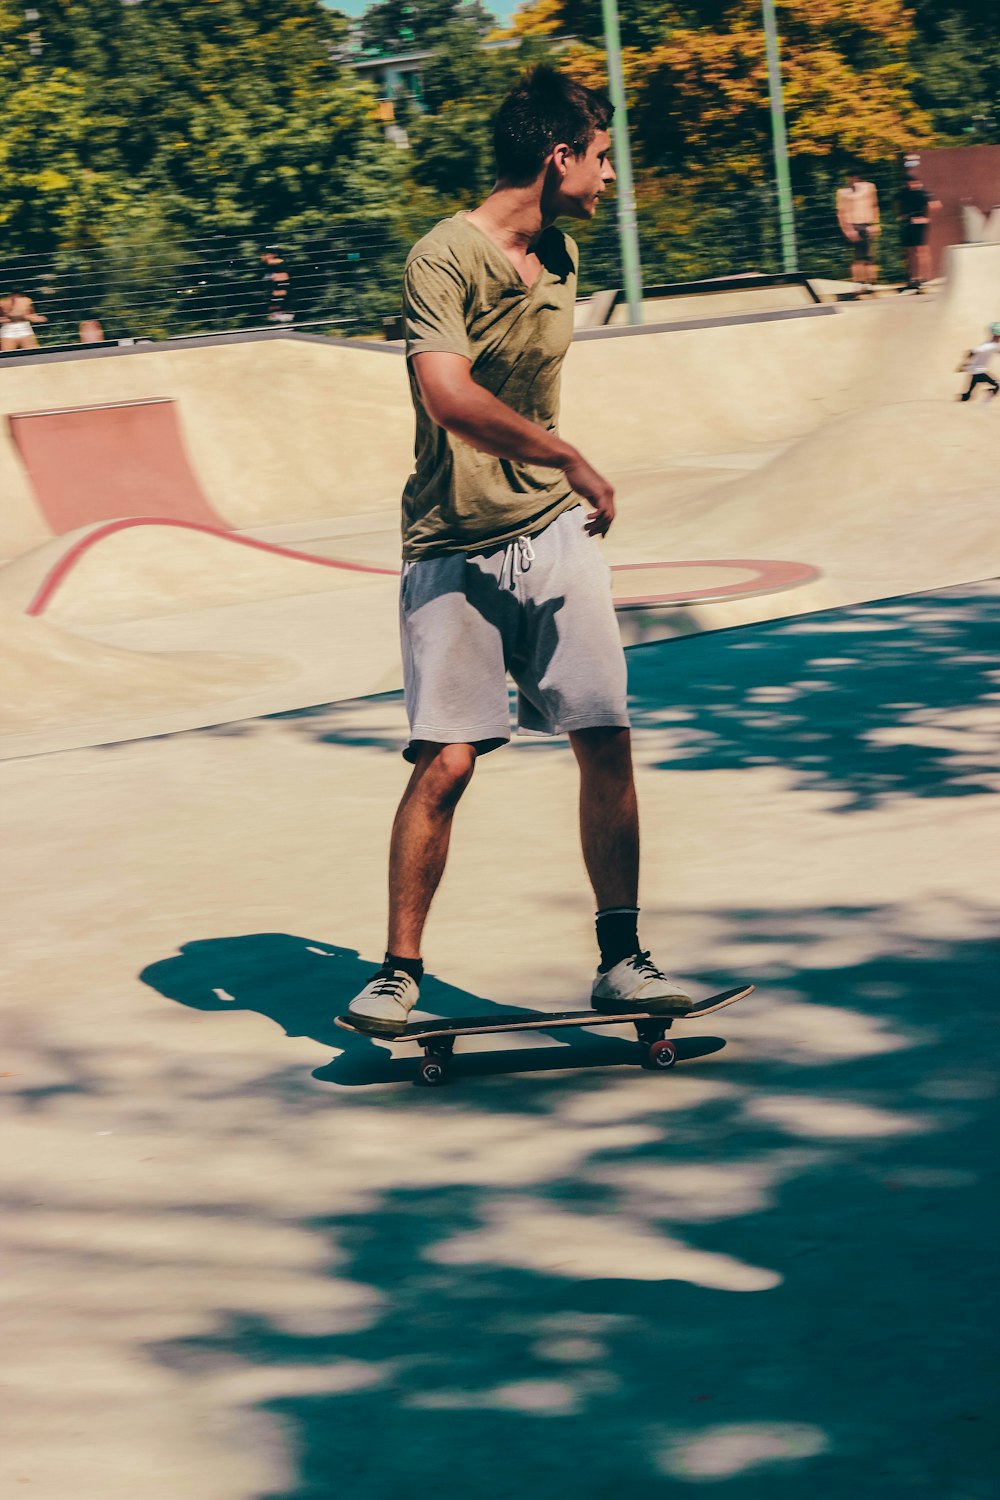 man in white shorts and black shoes playing skateboard during daytime